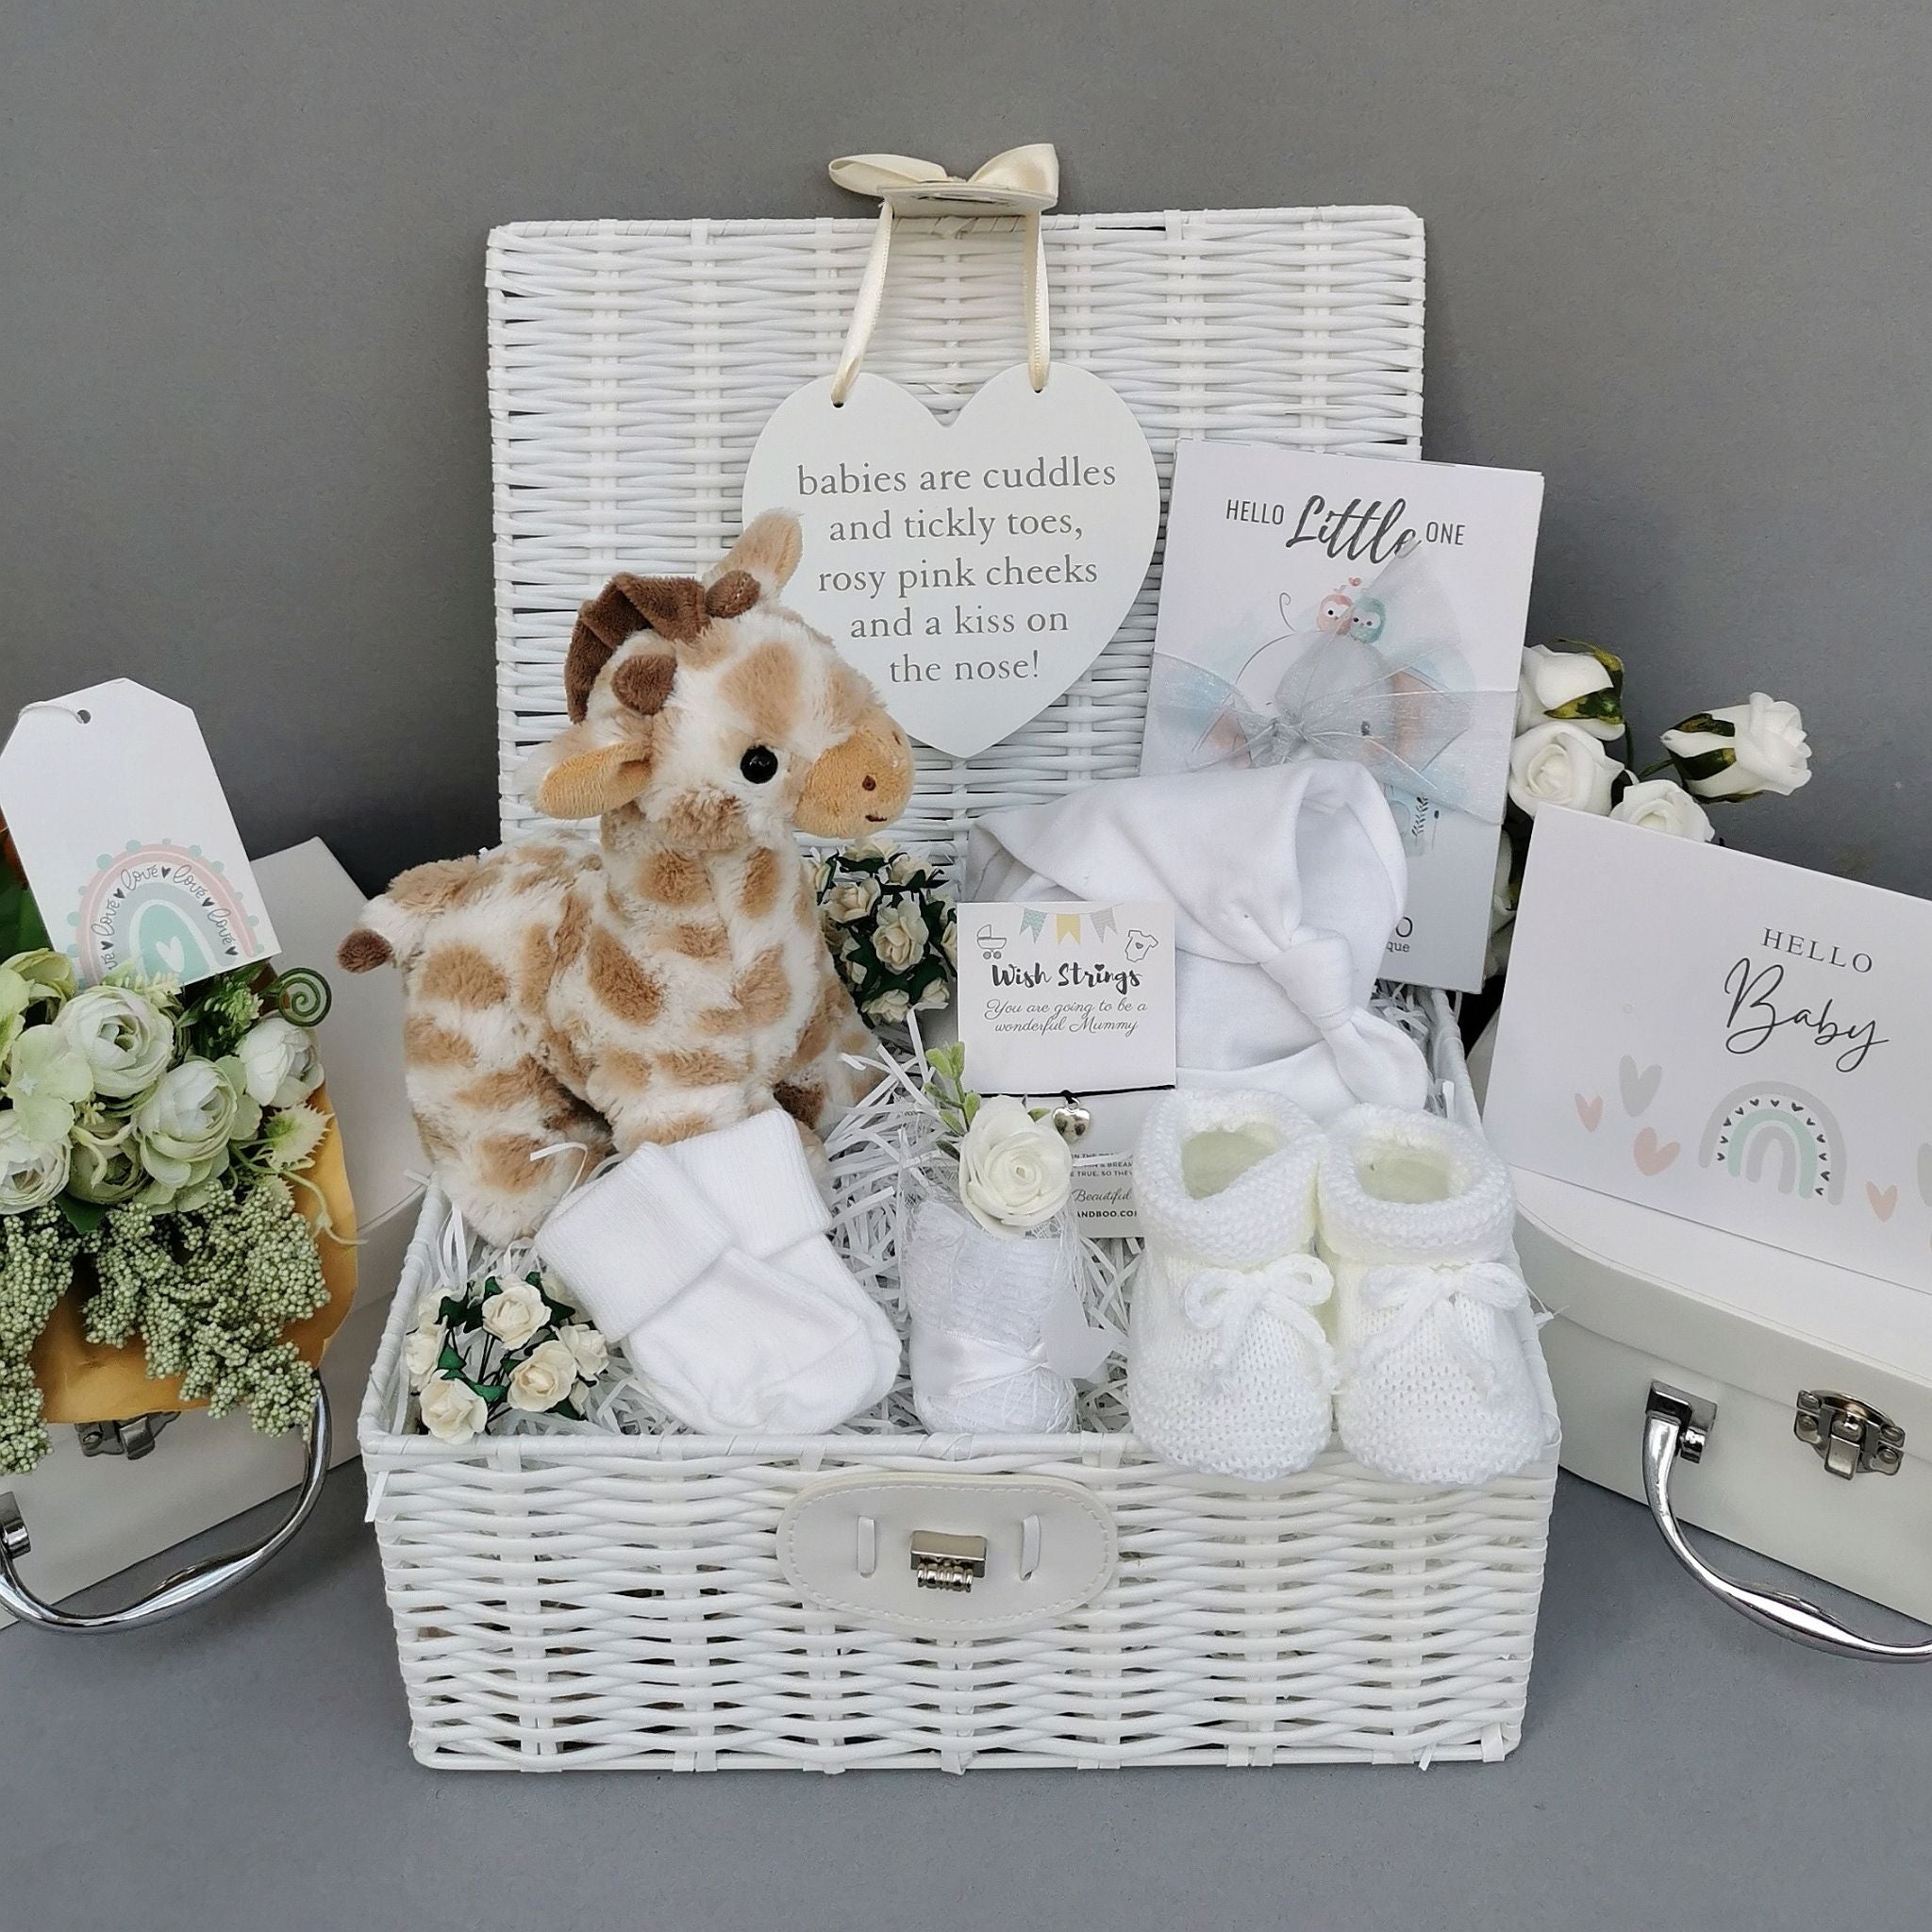 Design Your Own Baby Hamper - Bumbles & Boo